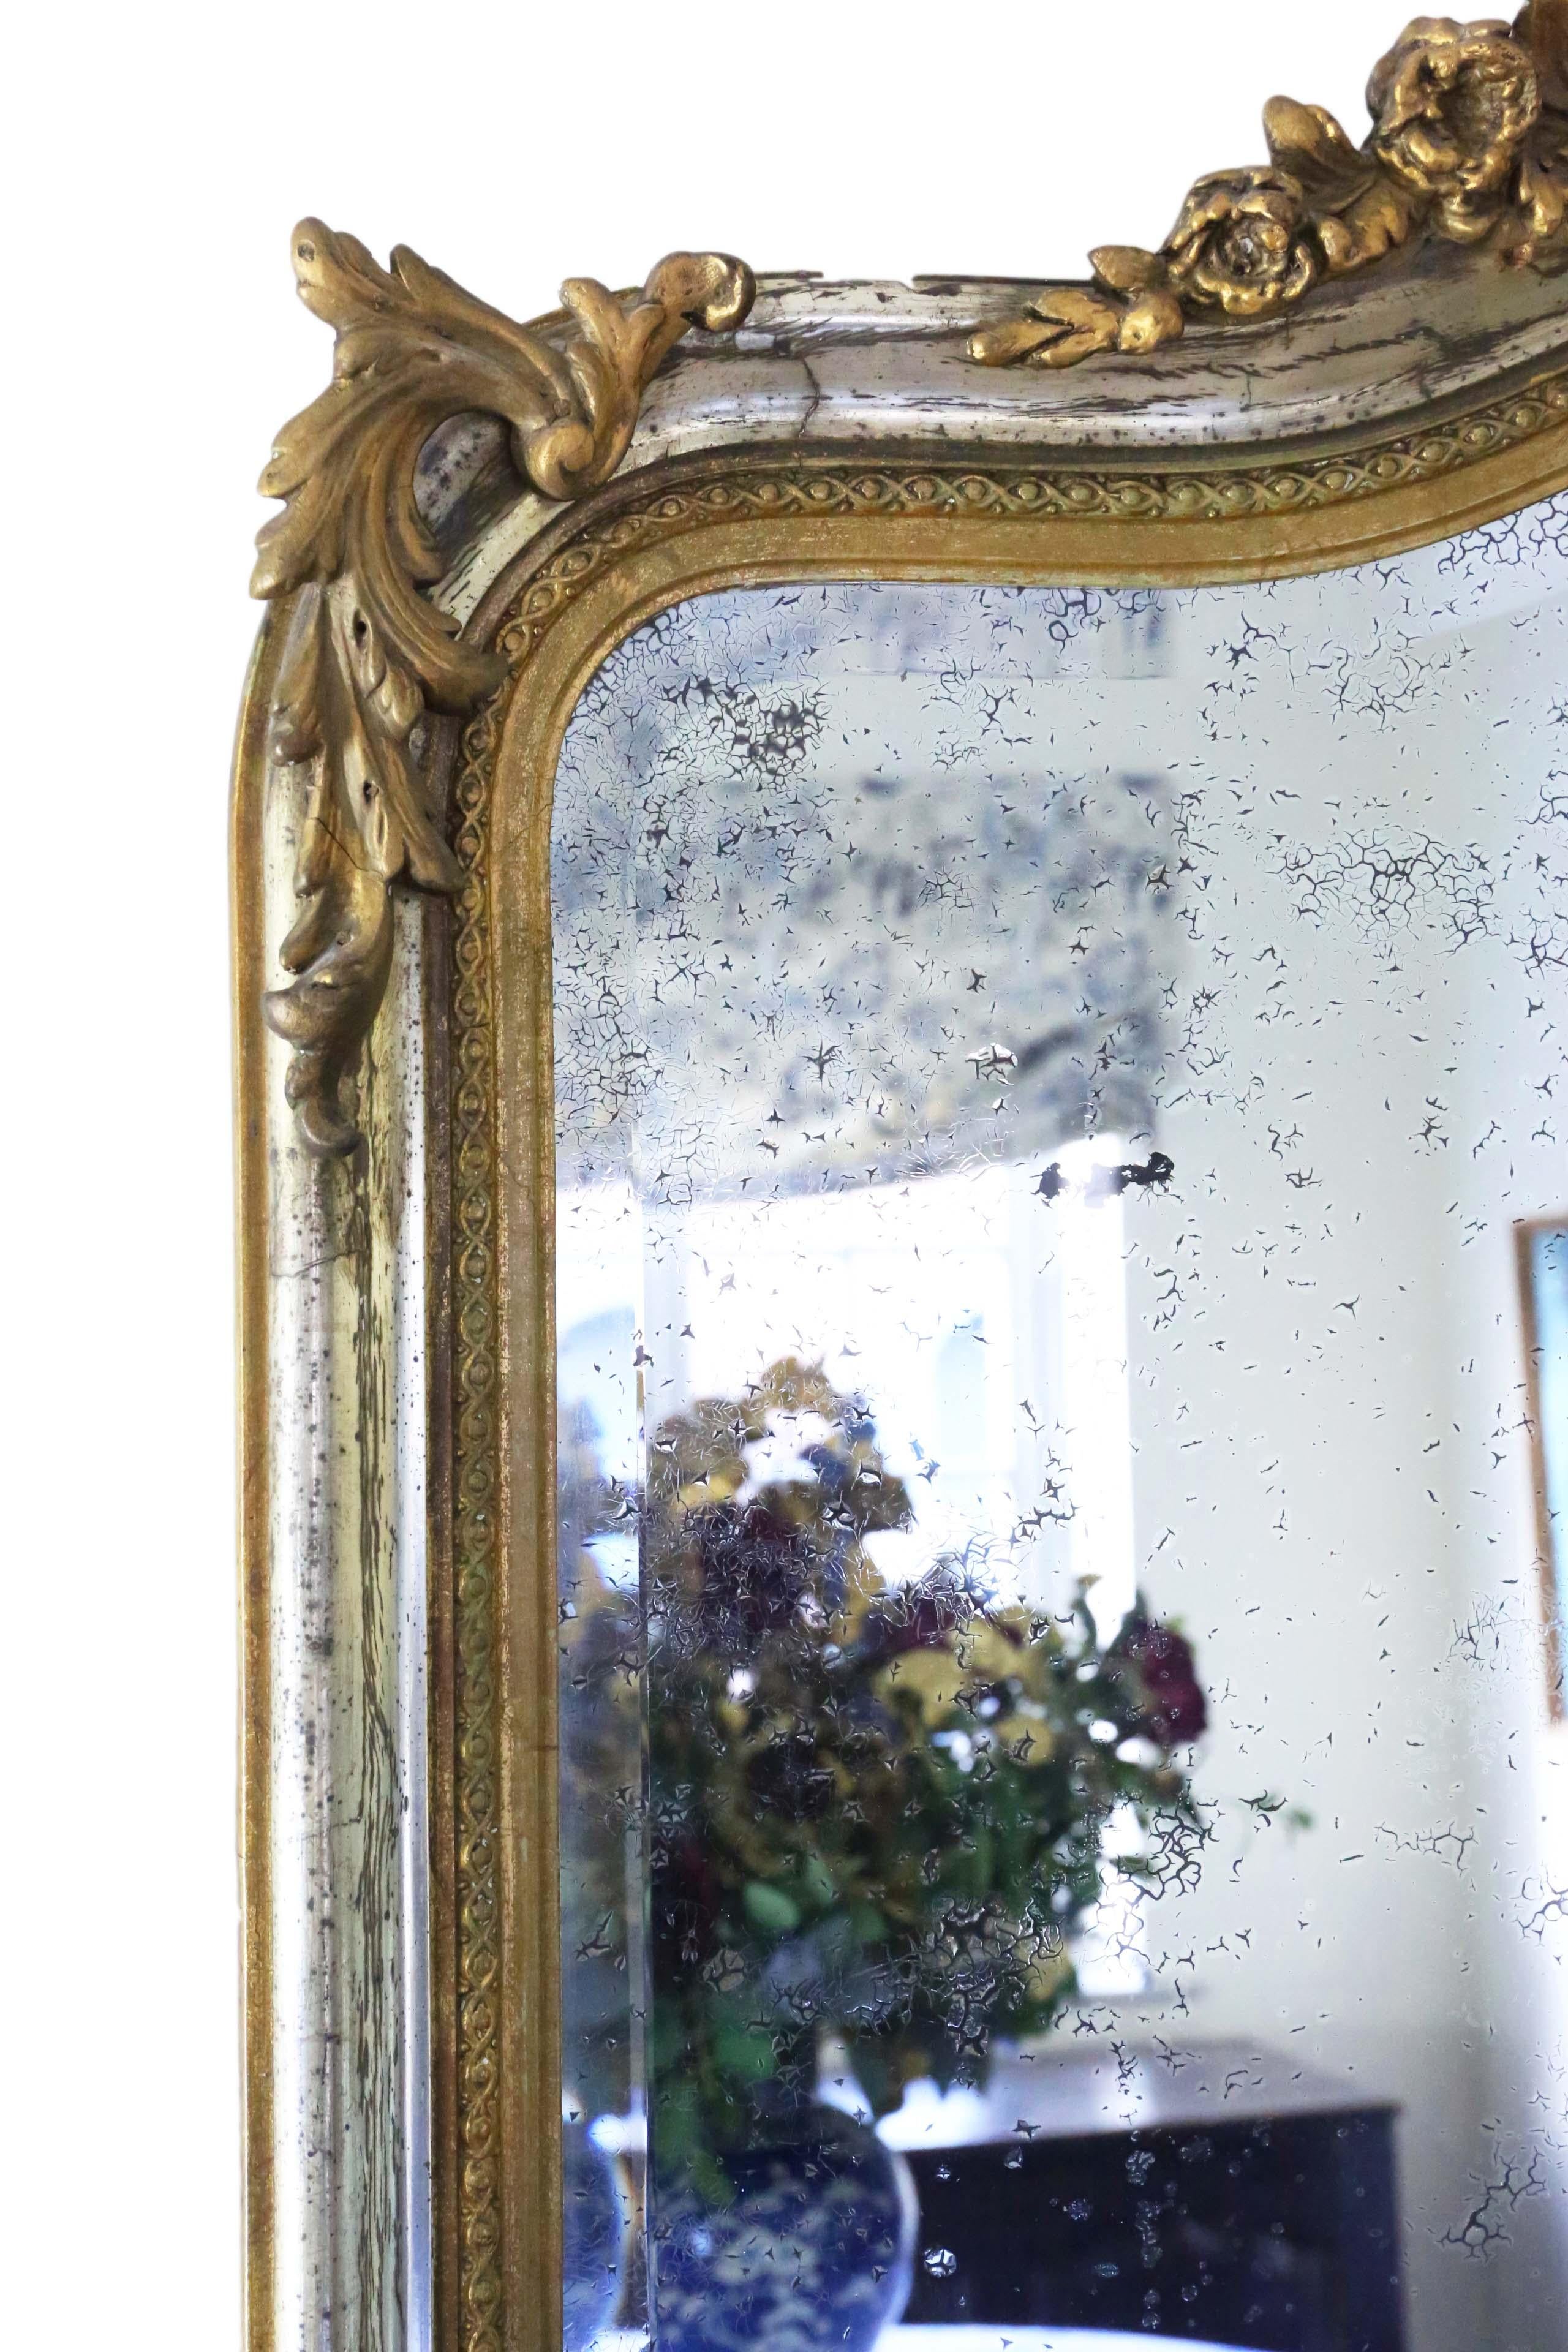 Antique very large fine quality gilt floor, wall or overmantle mirror, 19th Century. A very large rare breathtaking statement piece.

An impressive rare find, that would look amazing in the right location. No loose joints or woodworm. Original